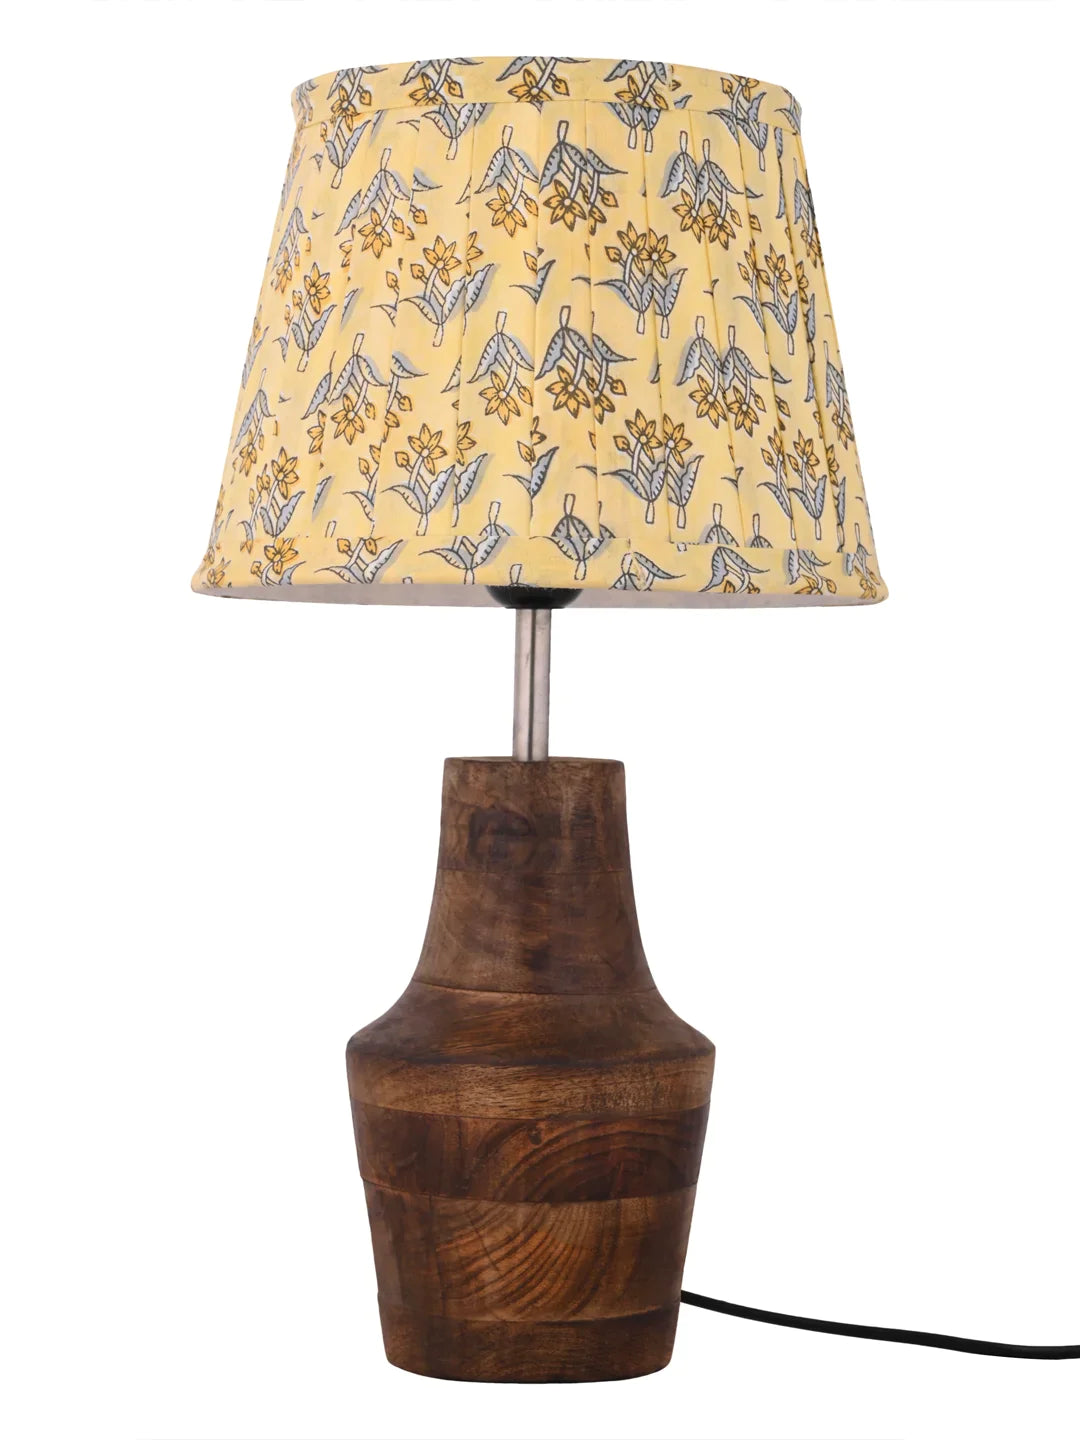 Wooden Firkin Table Lamp with Pleeted Colorful Lemon Taper Shade